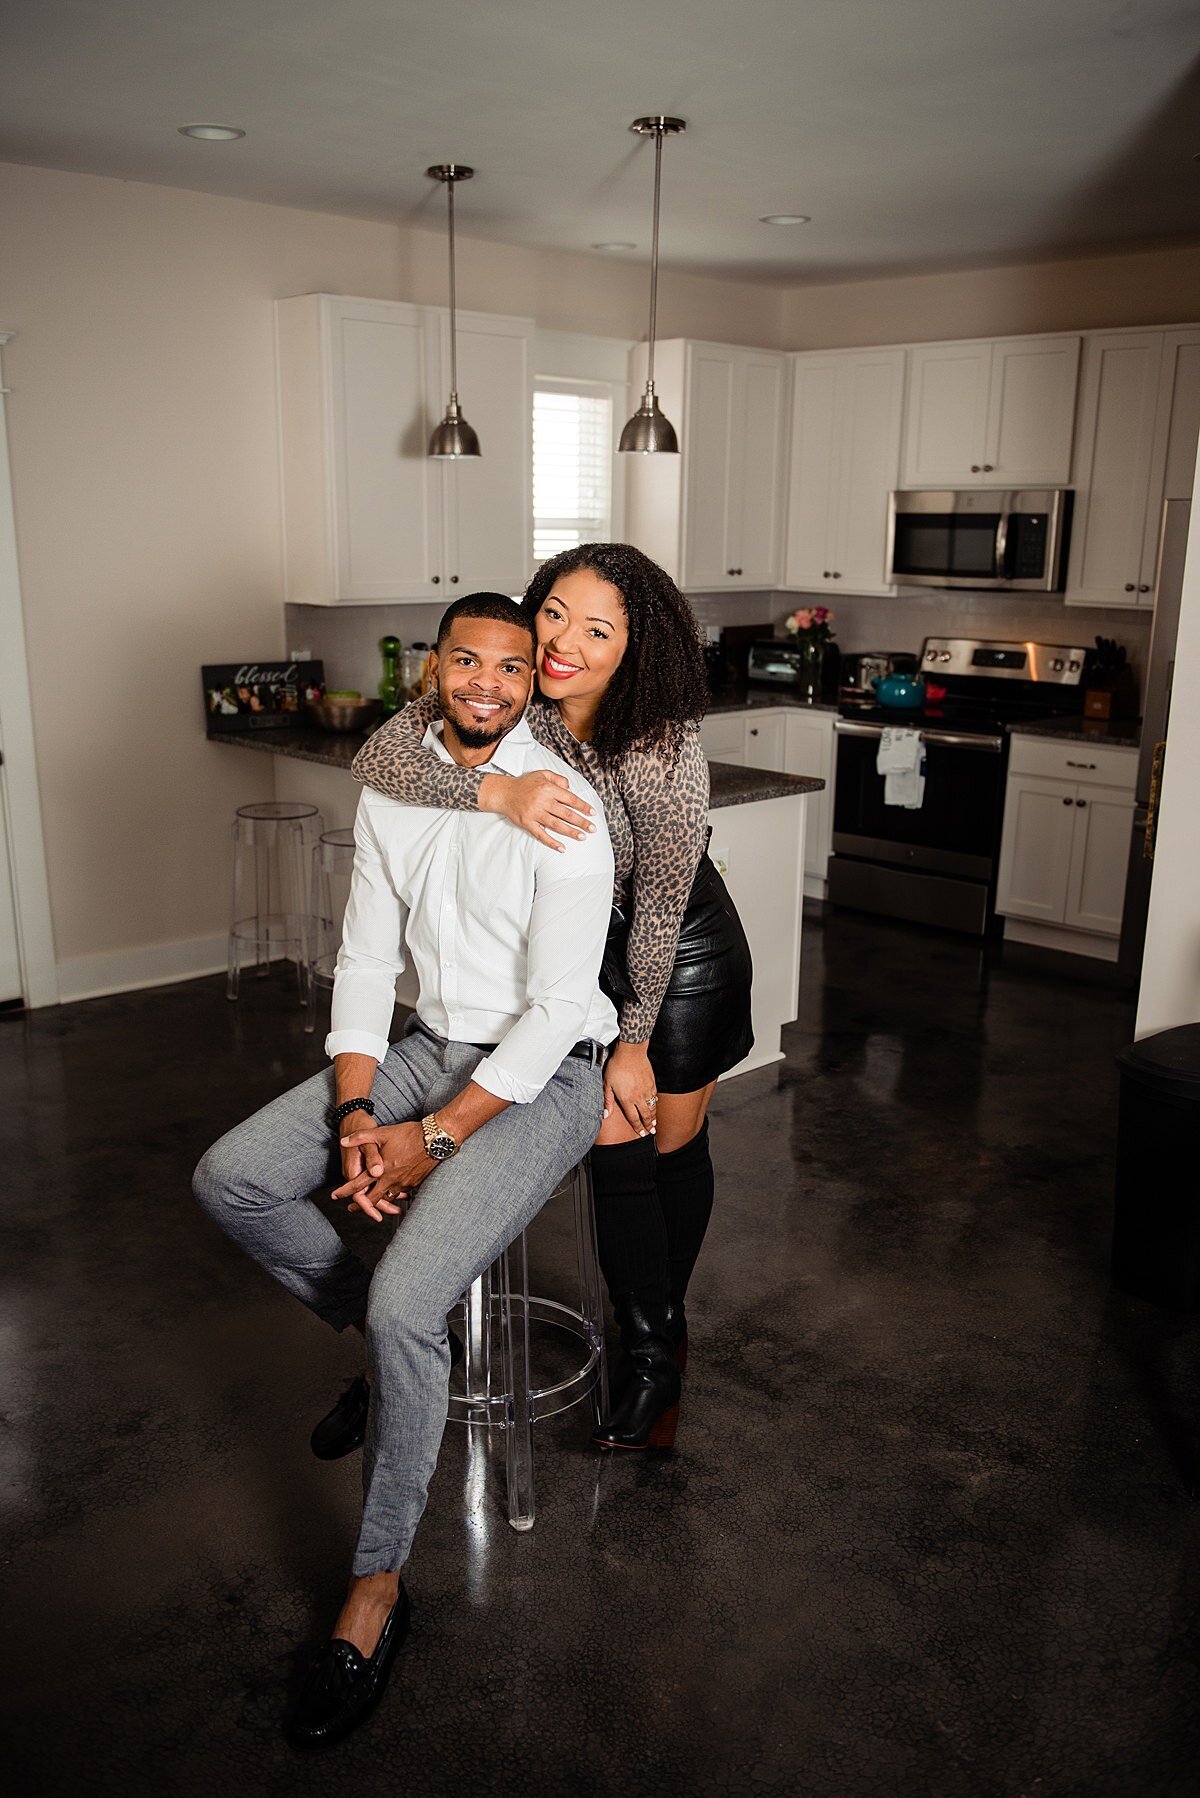 Jasmine Sweet with her husband in their new kitchen smiling at the camera